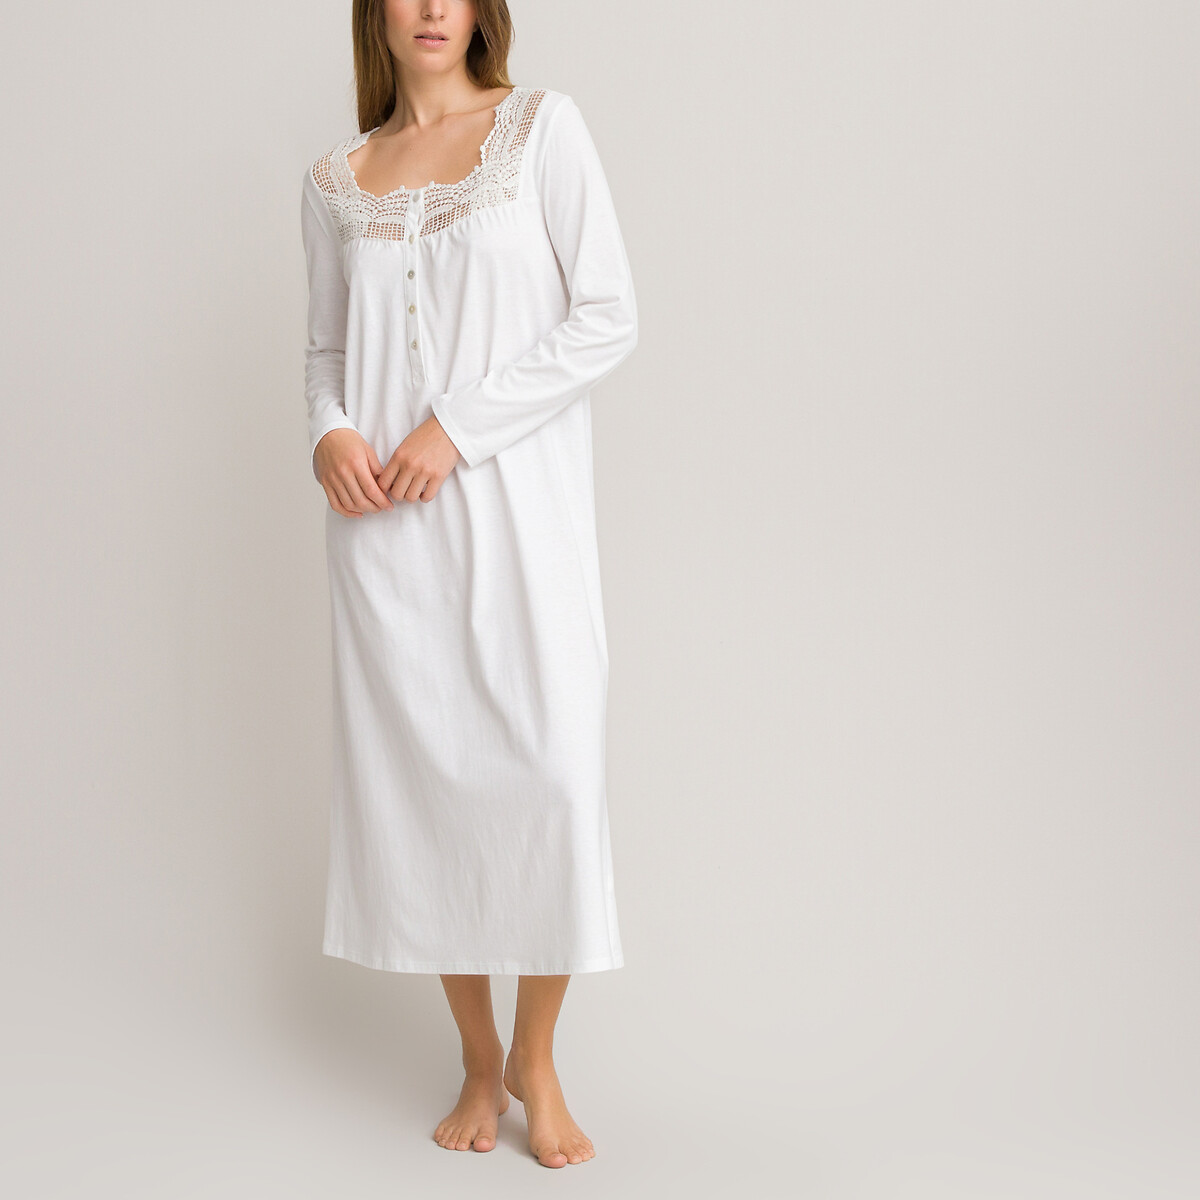 Image of Cotton and Lace Nightdress